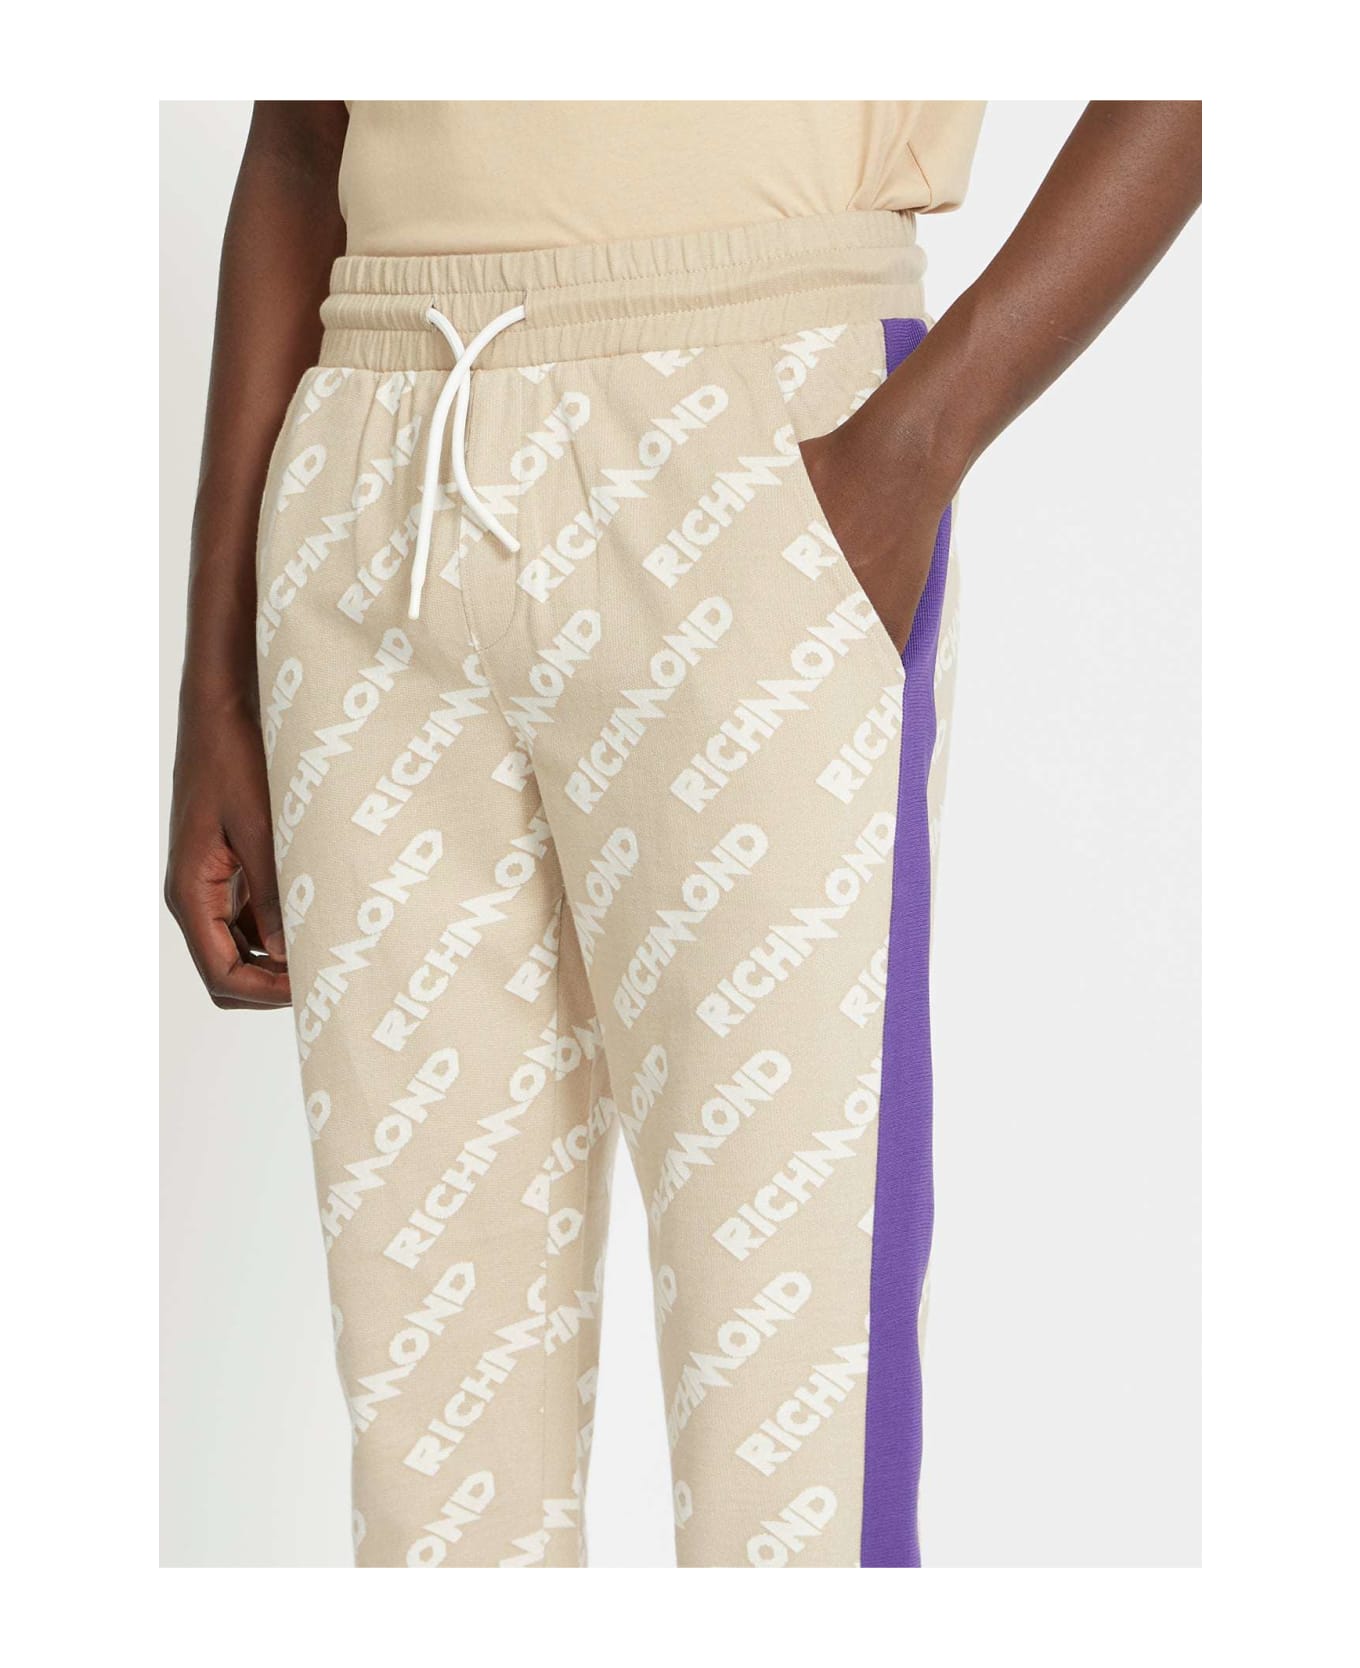 John Richmond Jogging Pants With Contrasting Logo On The Back - Beige